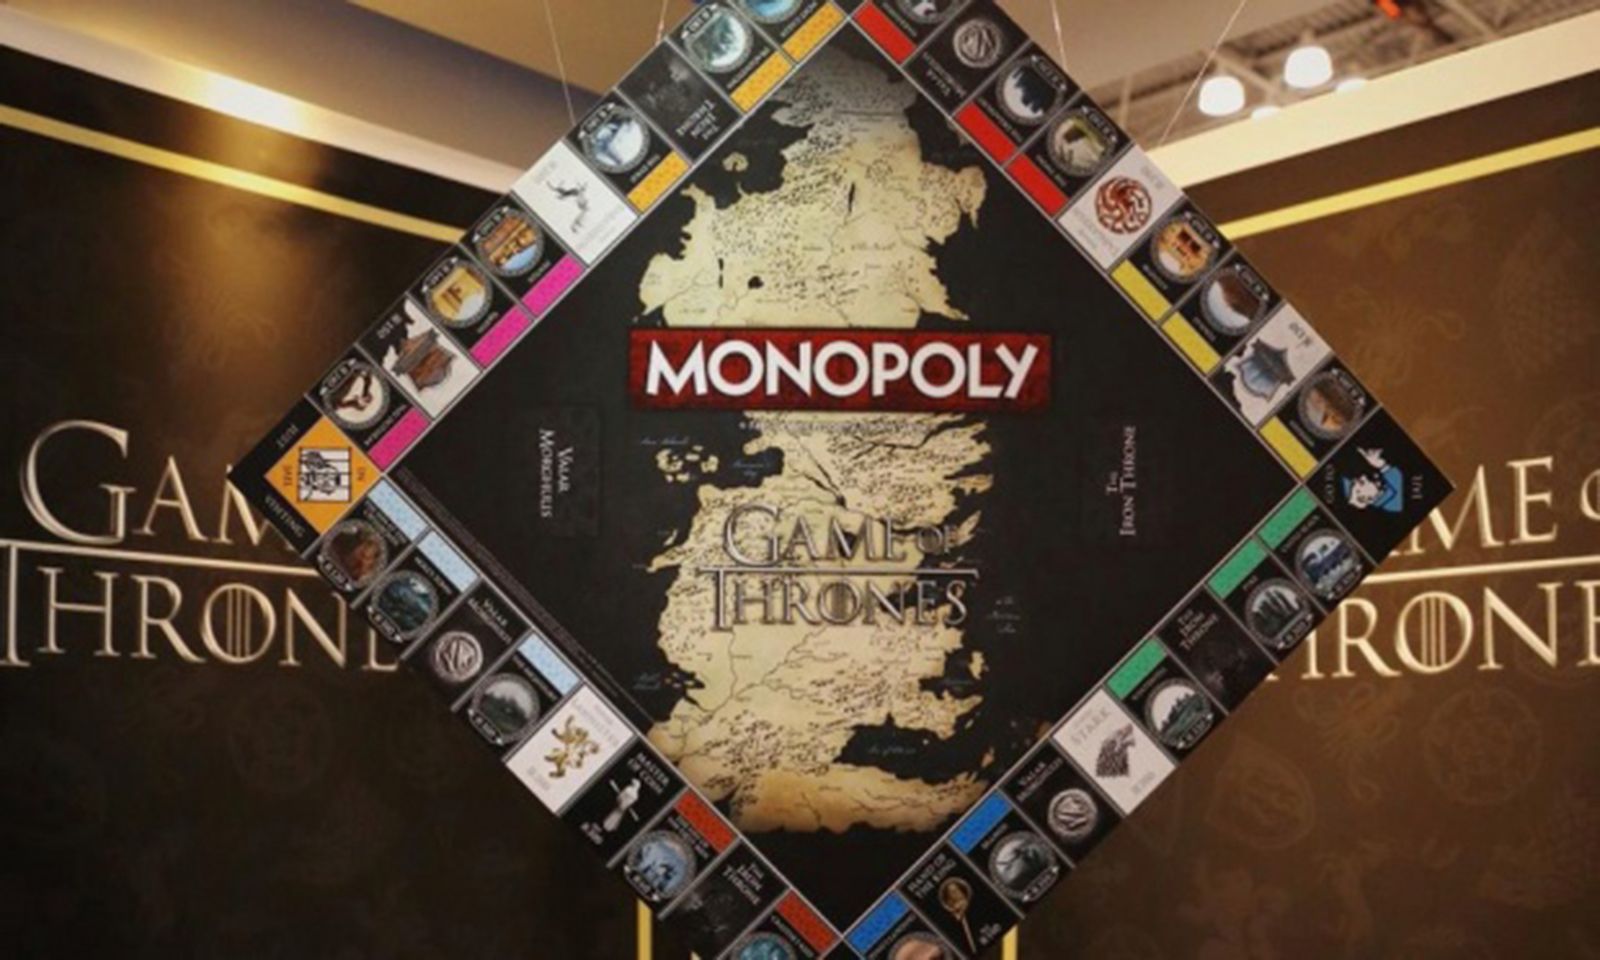 winter is coming to monopoly new board game for game of thrones fans image 1